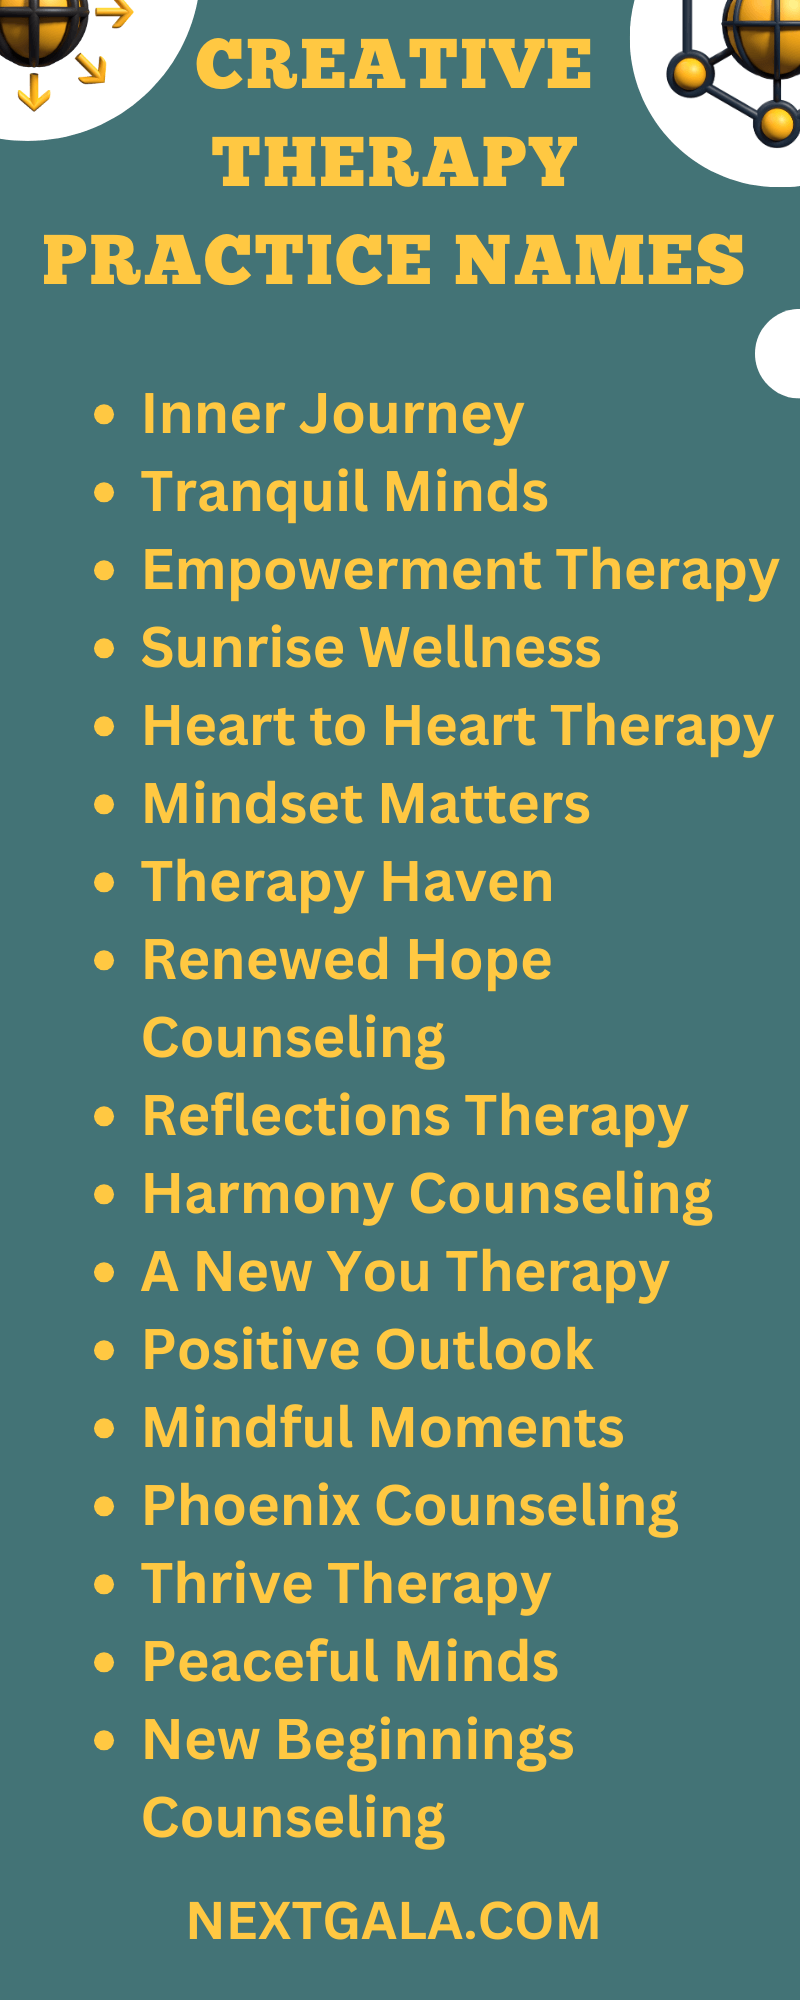 Creative Therapy Practice Names